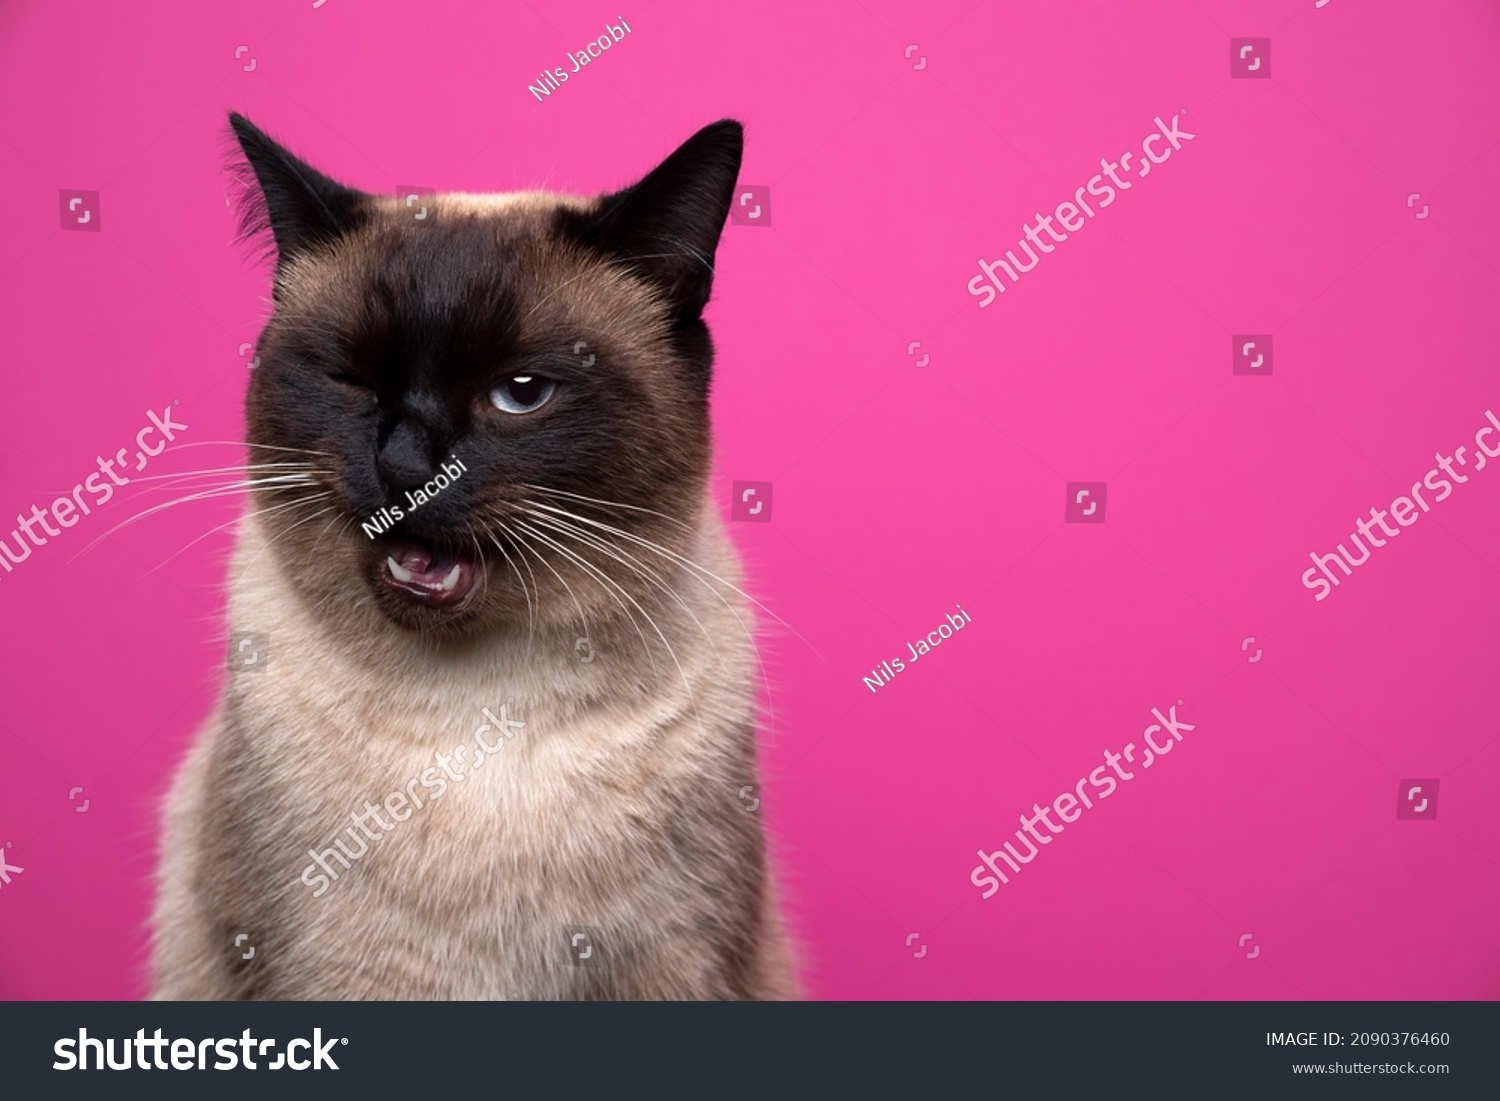 cute seal point siamese cat making funny face winking at camera on pink background with copy space #2090376460